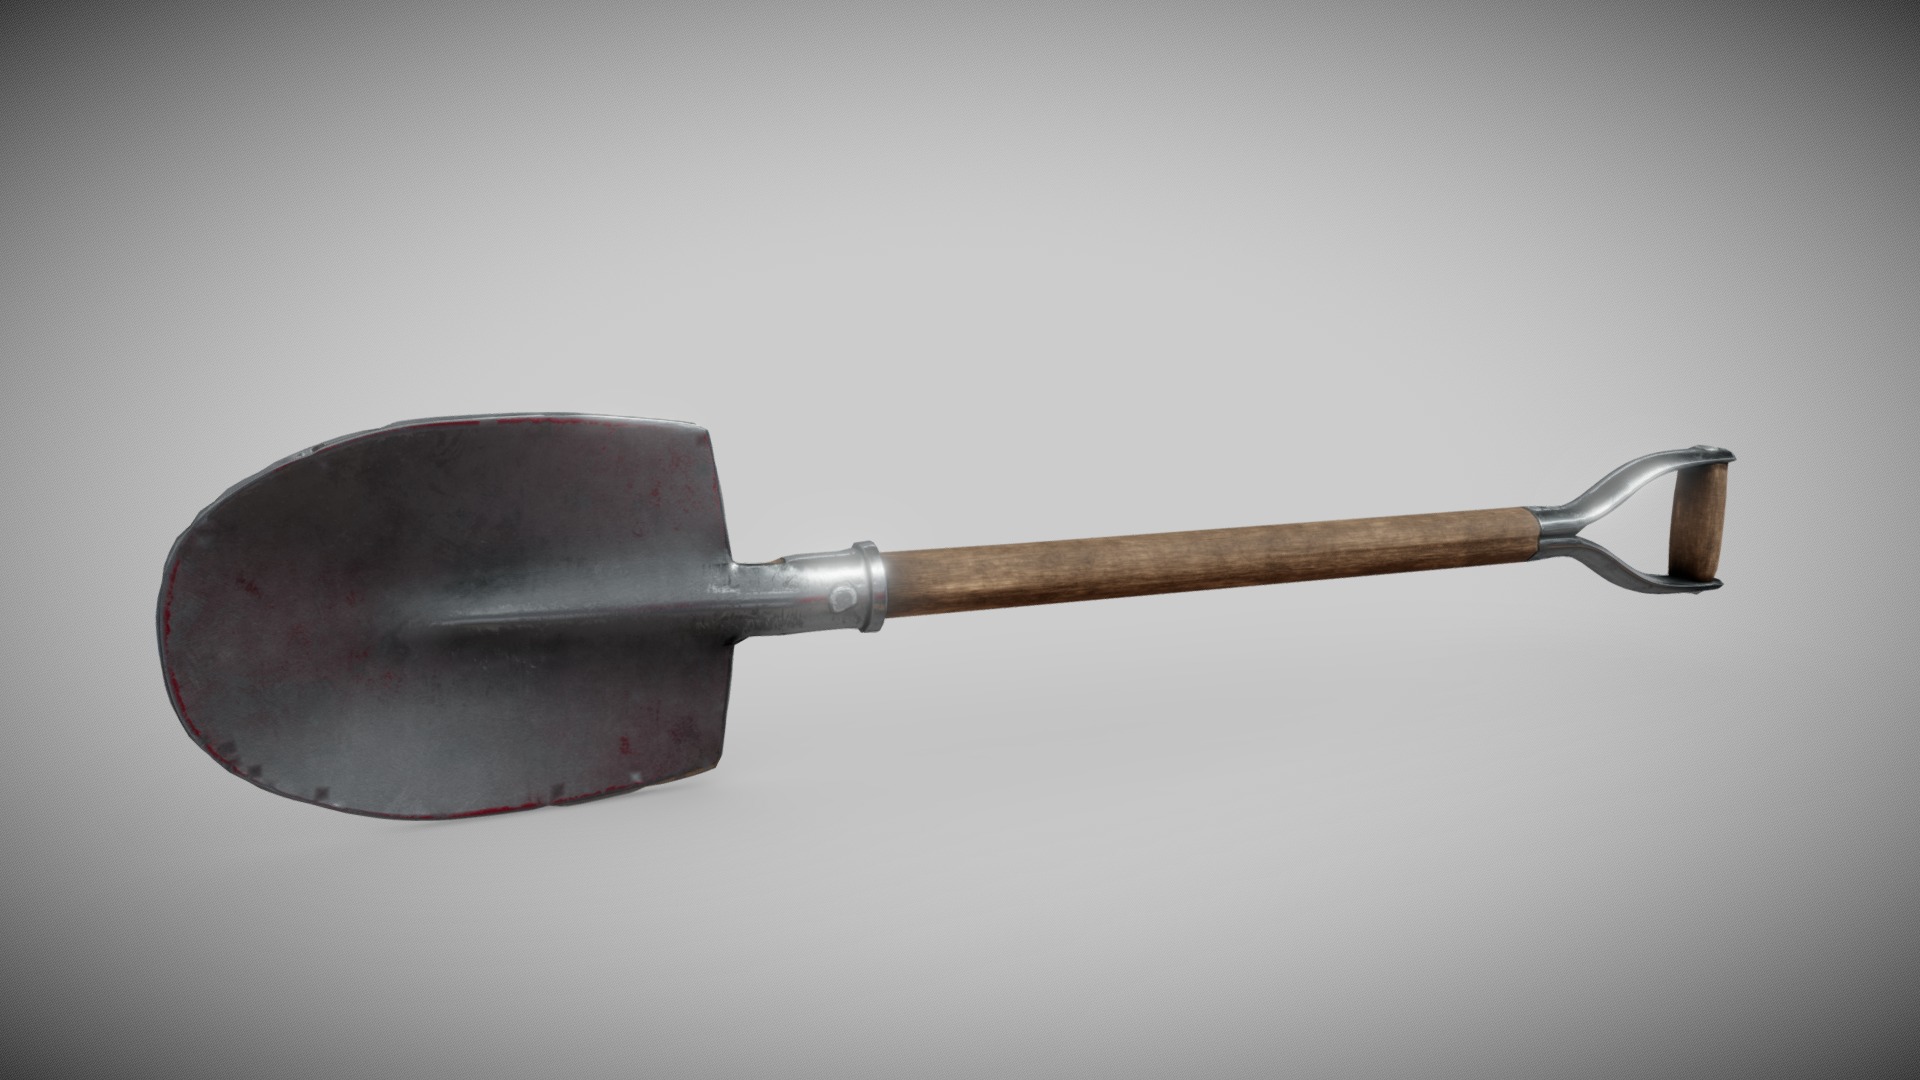 3D model Shovel Low poly - This is a 3D model of the Shovel Low poly. The 3D model is about a metal object with a handle.